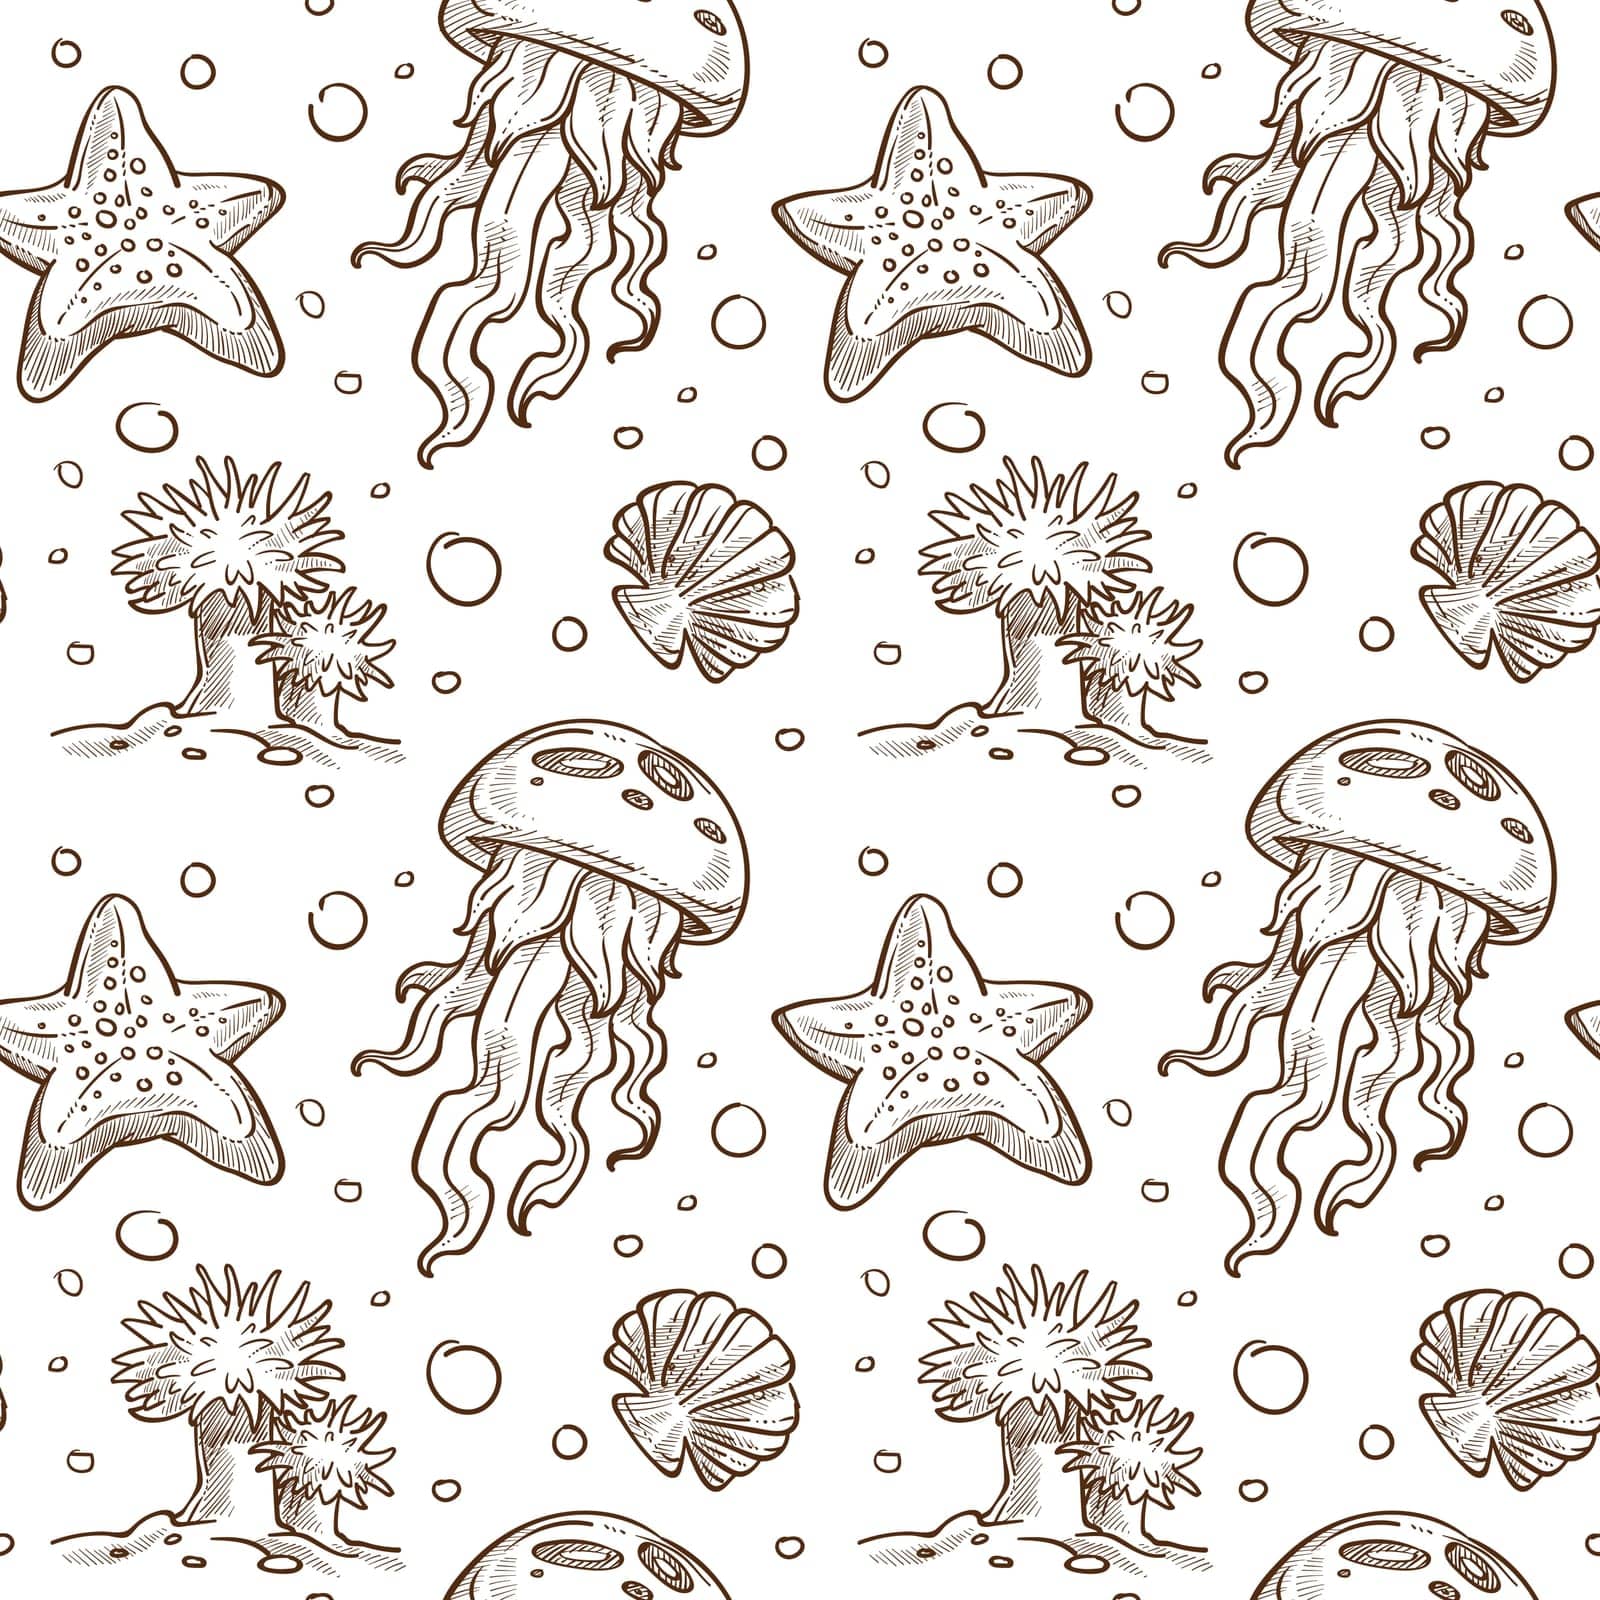 Sea and ocean life, marine dwellers. Madusa and conches, weeds and bubbles underwater. Snorkeling monochrome sketch outline. Seamless pattern, wallpaper background print. Vector in flat style